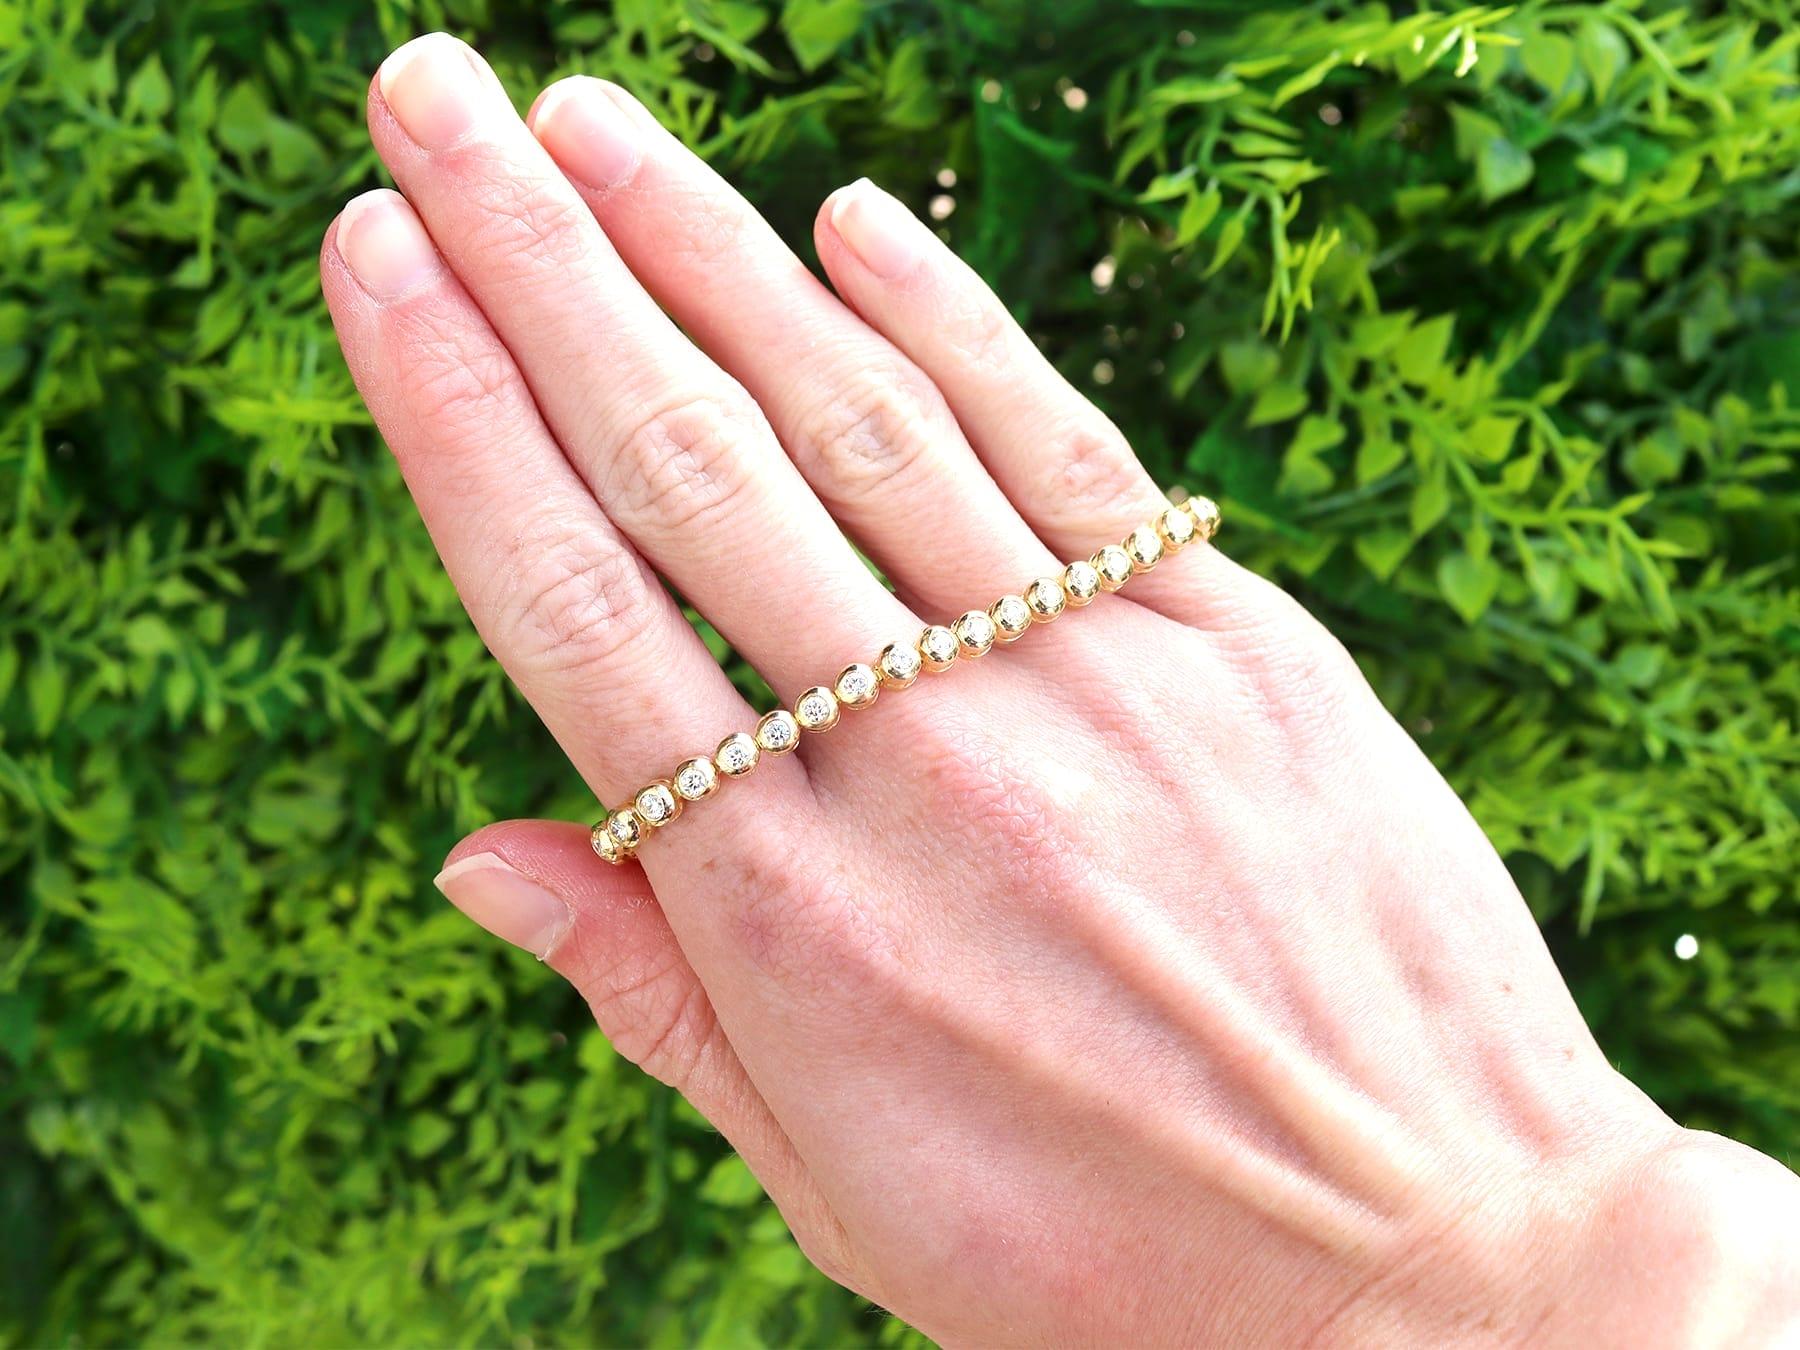 A fine and impressive vintage 2.25 carat diamond and 18 karat yellow gold tennis bracelet; part of our diverse diamond jewellery collection.

This fine and impressive diamond tennis bracelet has been crafted in 18k yellow gold.

The diamond bracelet